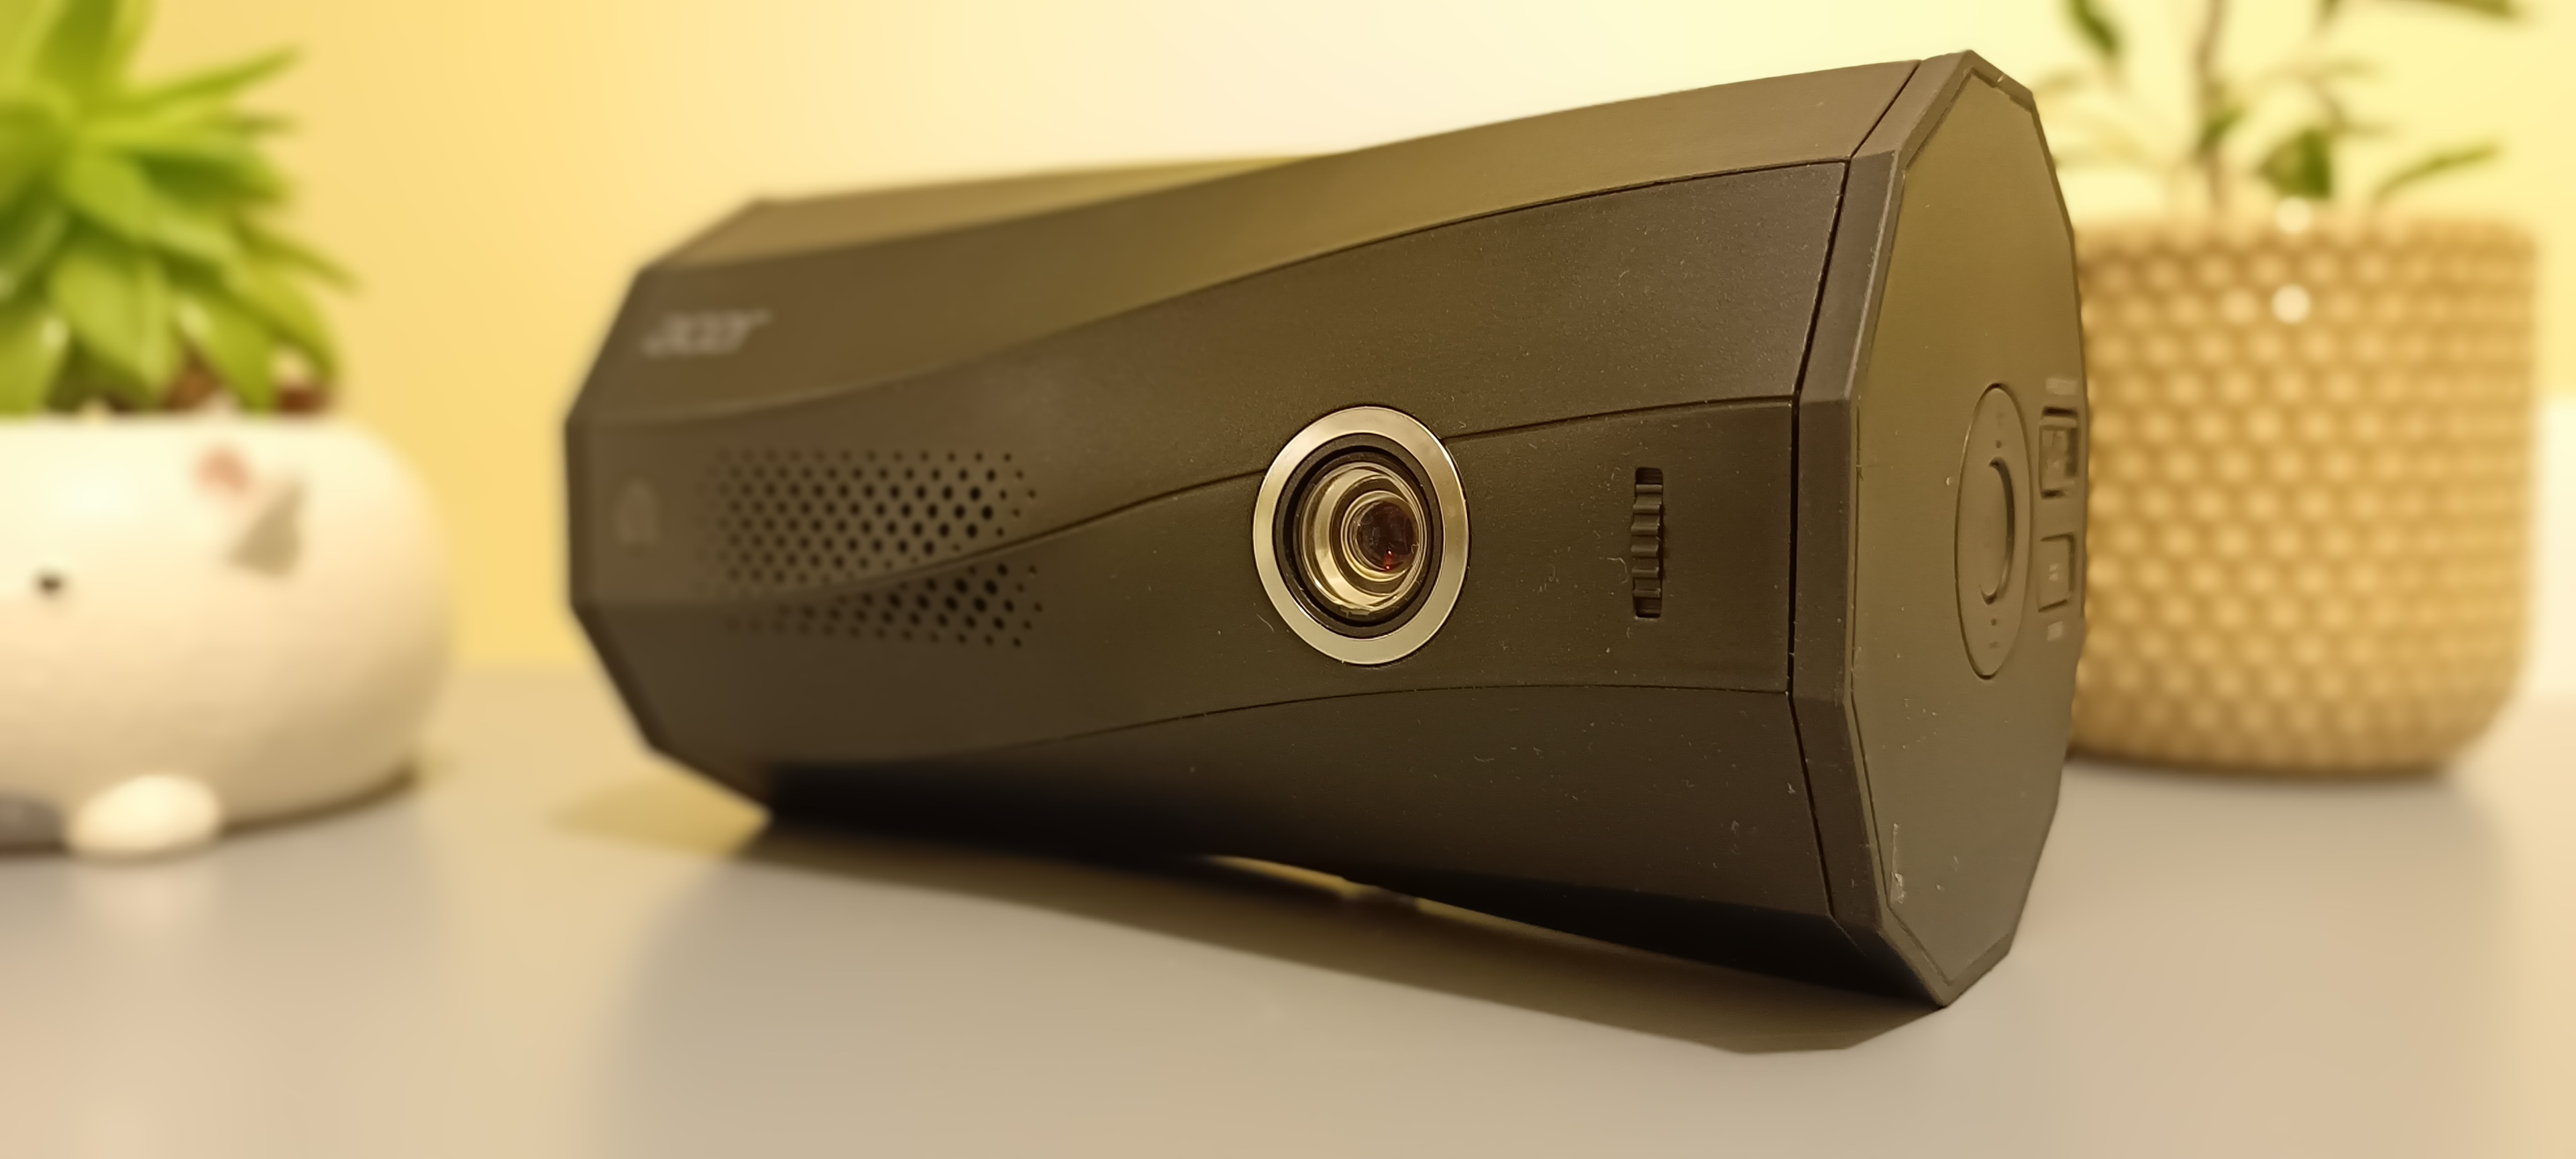 Acer C250i review: entry-level projector offers portability